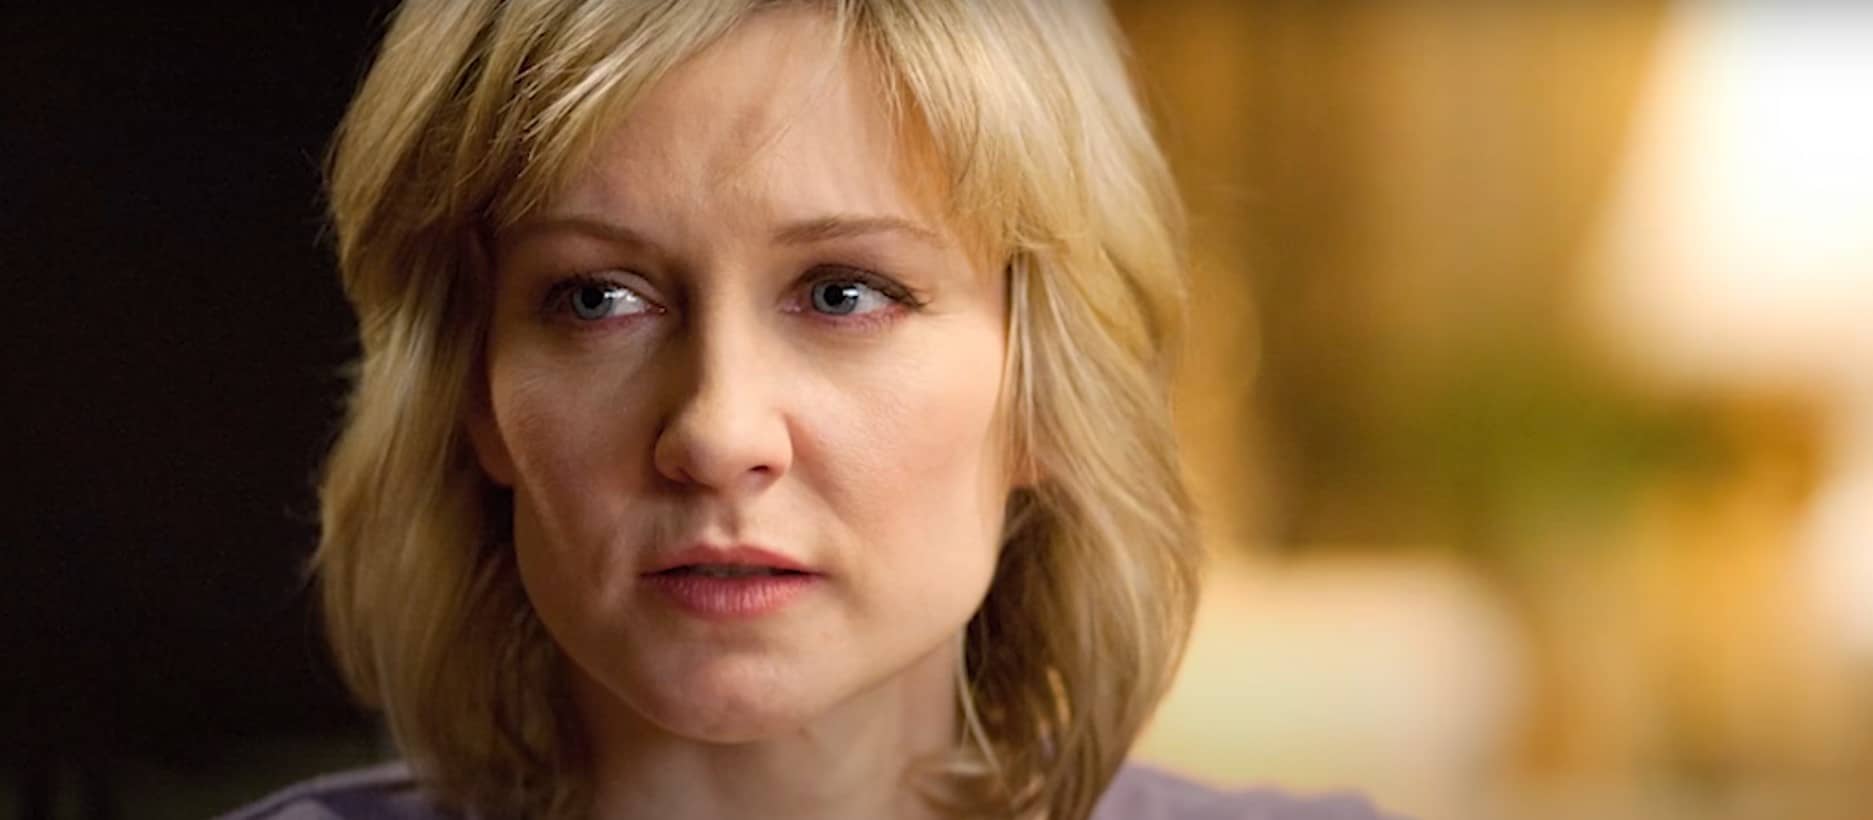 Why Did Linda Leave Blue Bloods?